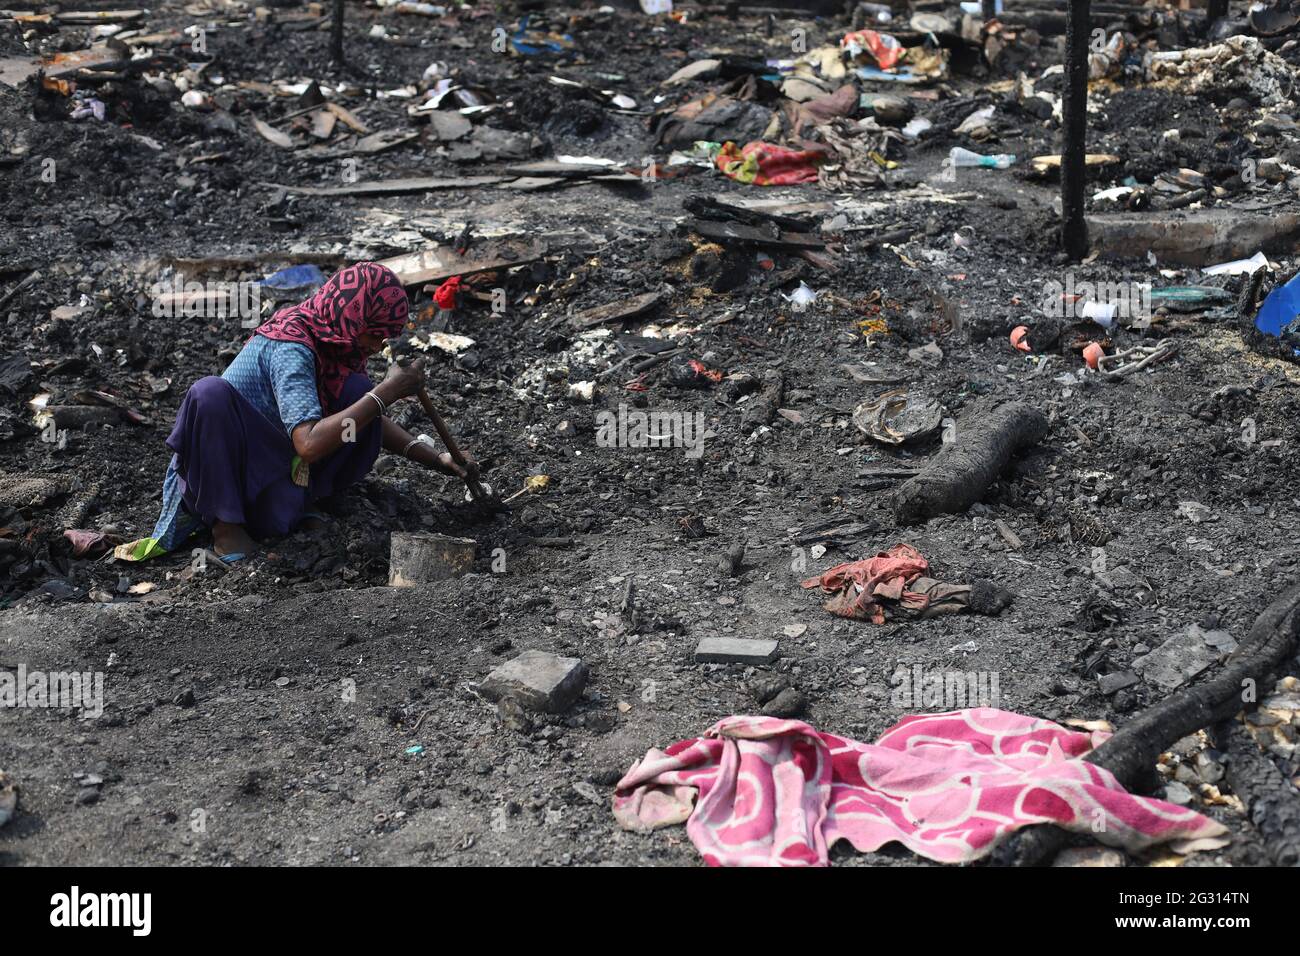 New Delhi, India. 13th June, 2021. A woman looks in the charred remains of their camp, during the aftermath.A fire incident broke out at the Rohingya refugee camp leaving over 50 shanties of Rohingya refugees gutted. The cause of the fire has not yet been established. Credit: SOPA Images Limited/Alamy Live News Stock Photo